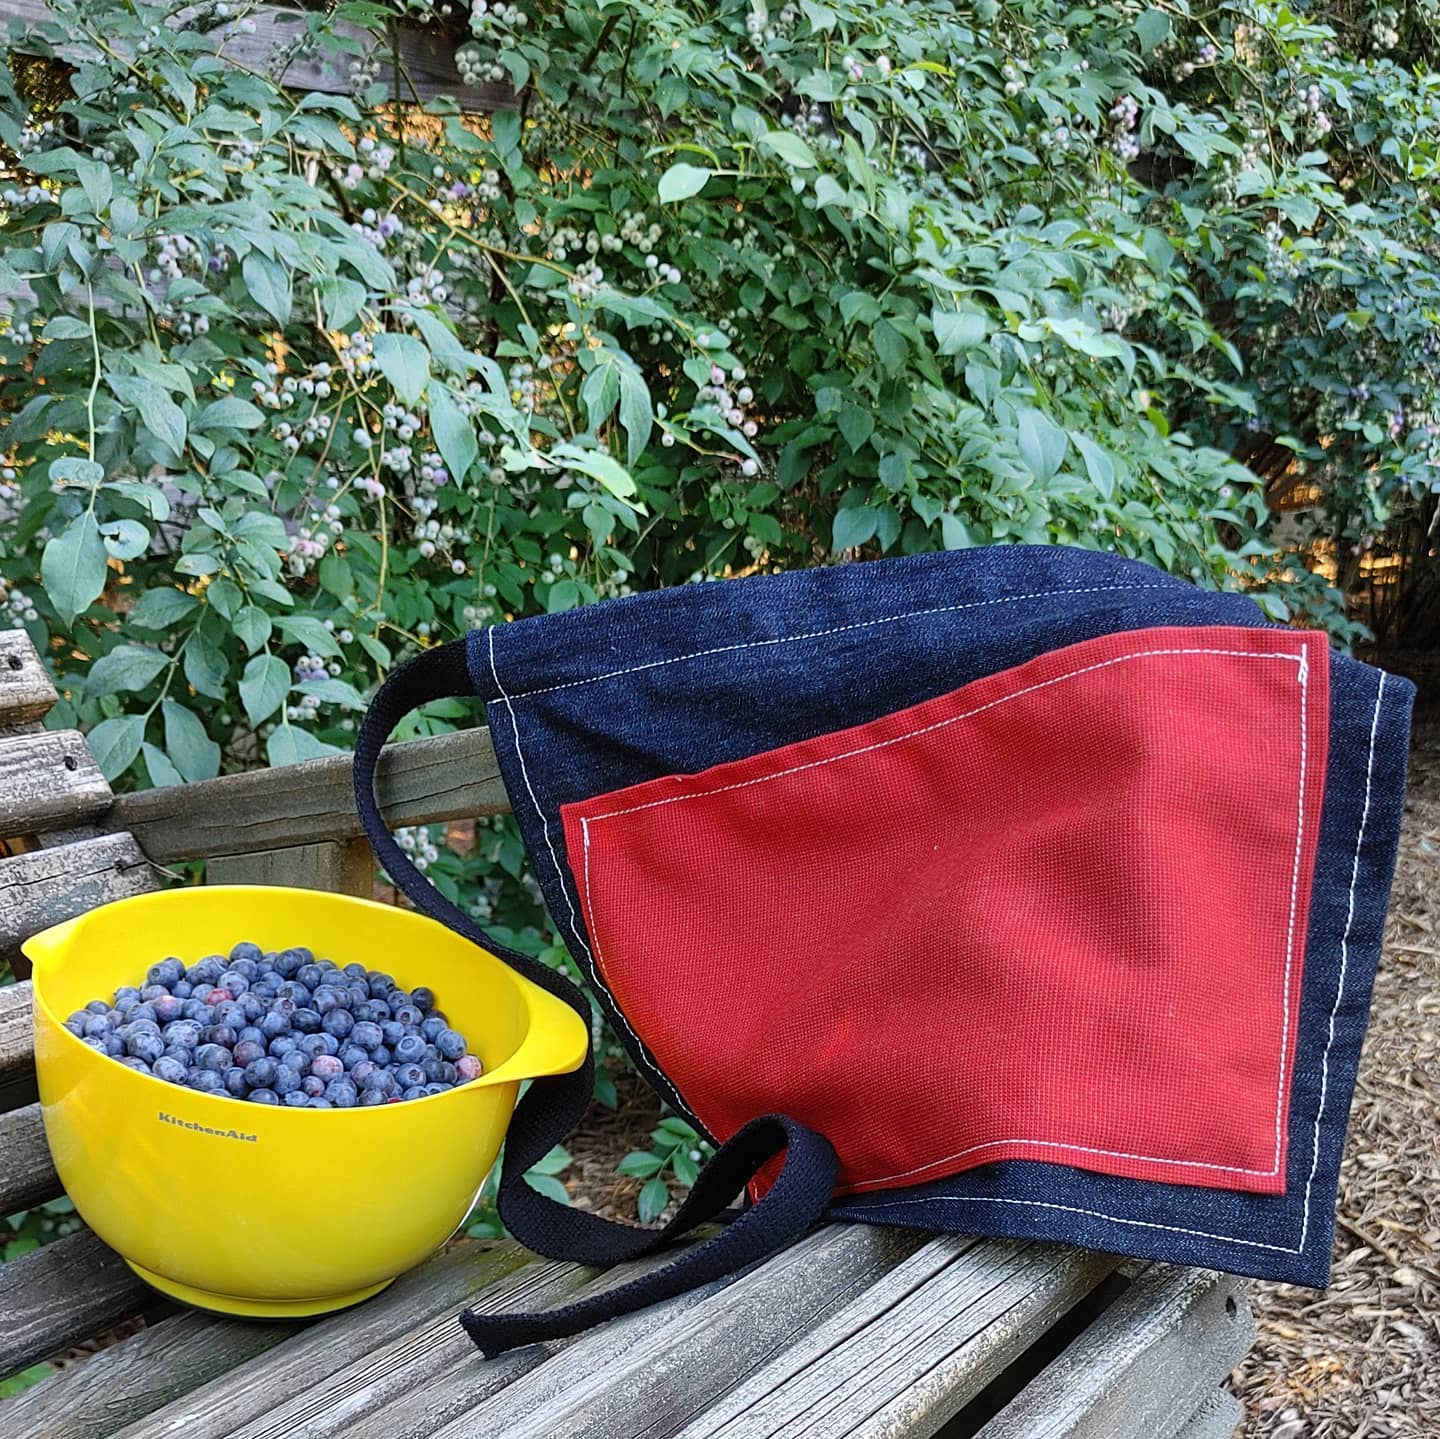 My first big blueberry harvest using my custom blueberry apron! I find it is much faster to harvest with two hands and it is too time consuming to walk back to the bowl with each handful. This is my solution. I think it needs one small modification and it will be perfect!